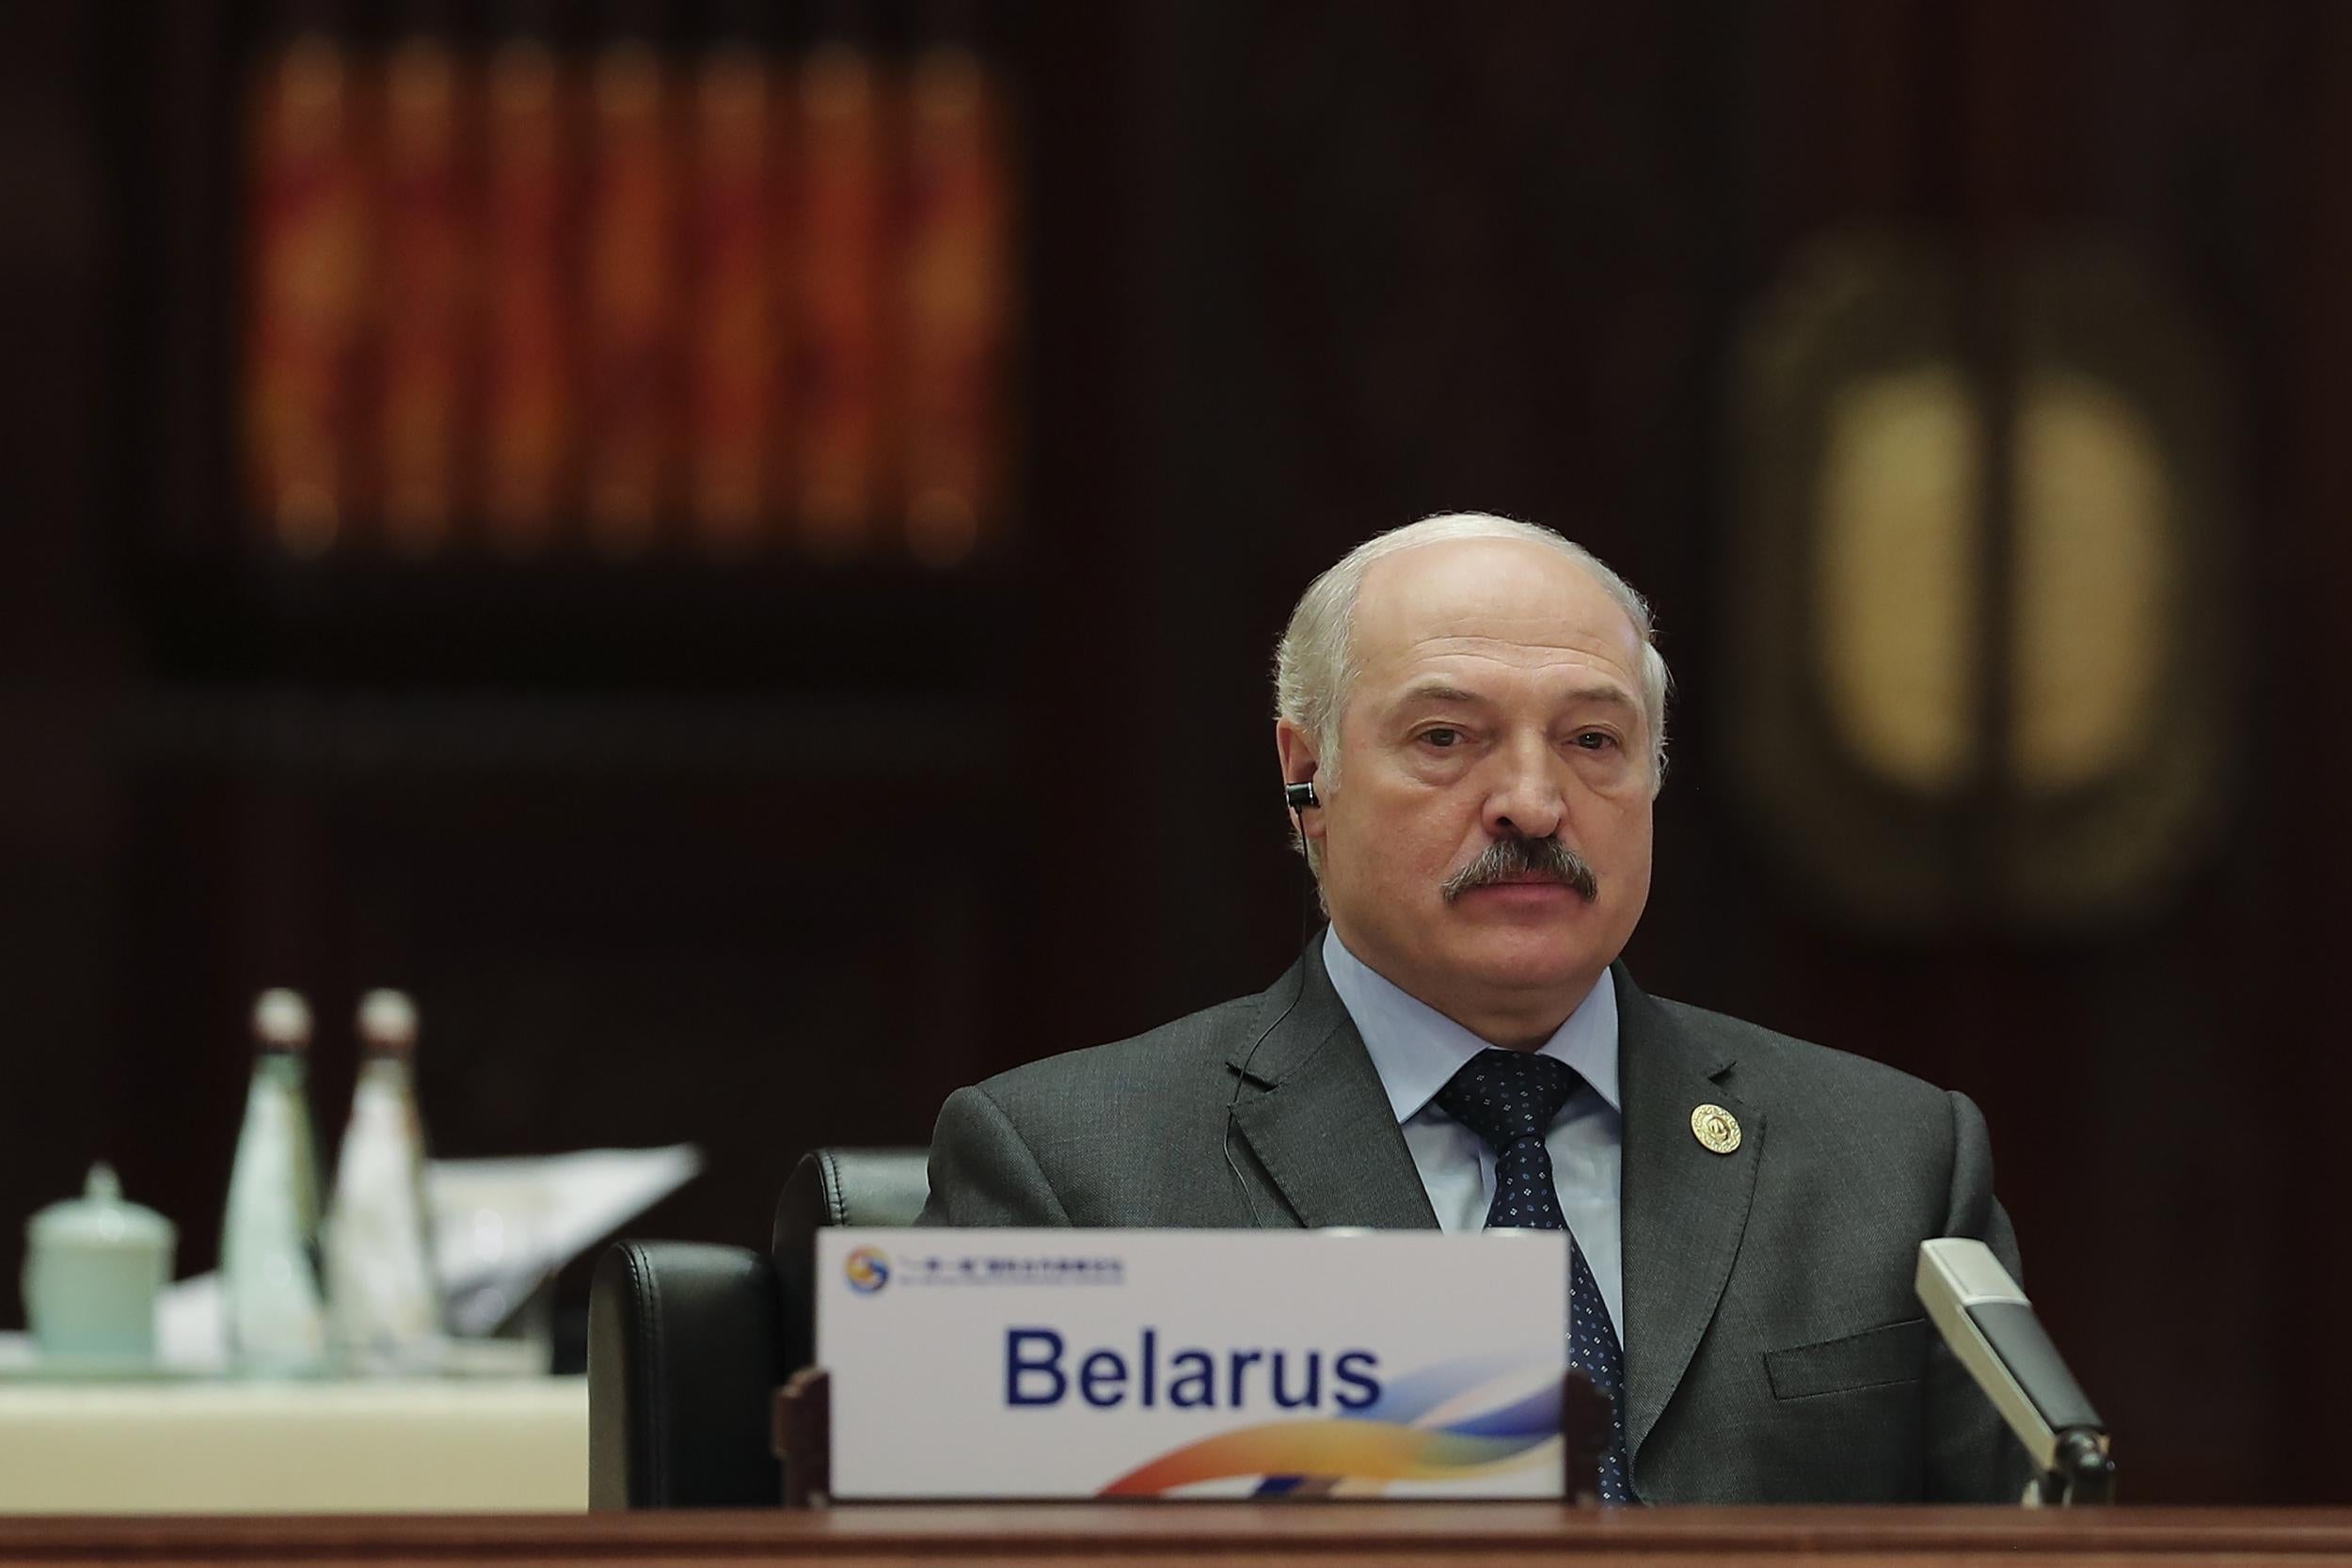 Like Ukraine, Belarus may be on the cusp of seismic political change